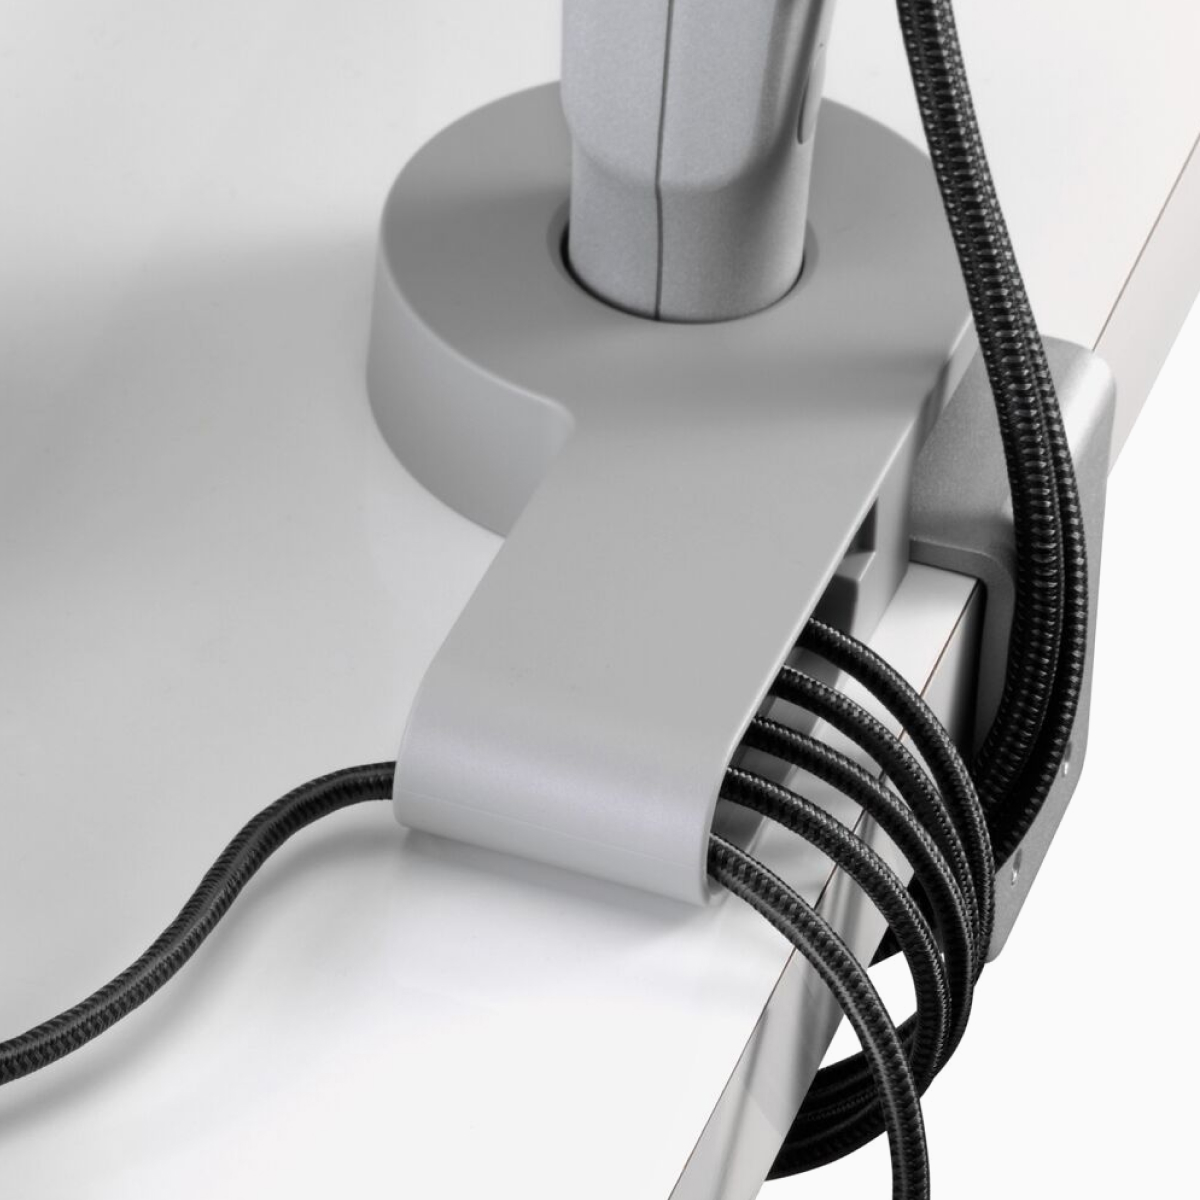 Angled view of power and data cables routed through an Ondo Connectivity Module and under a desk.